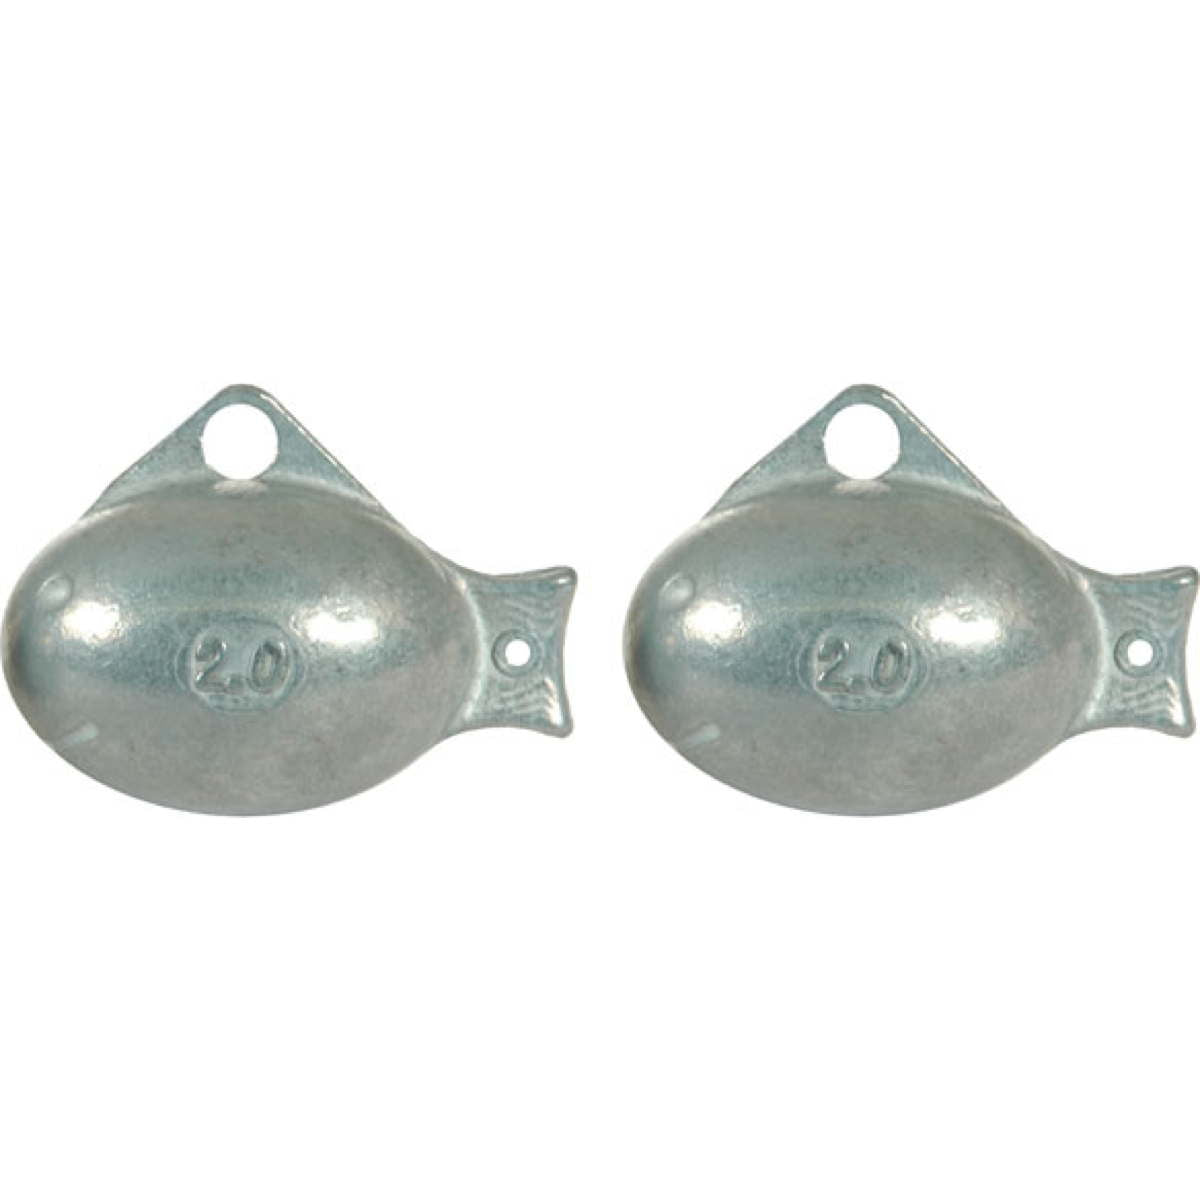 Photo of Off Shore Tackle Replacement Guppy Weights for sale at United Tackle Shops.